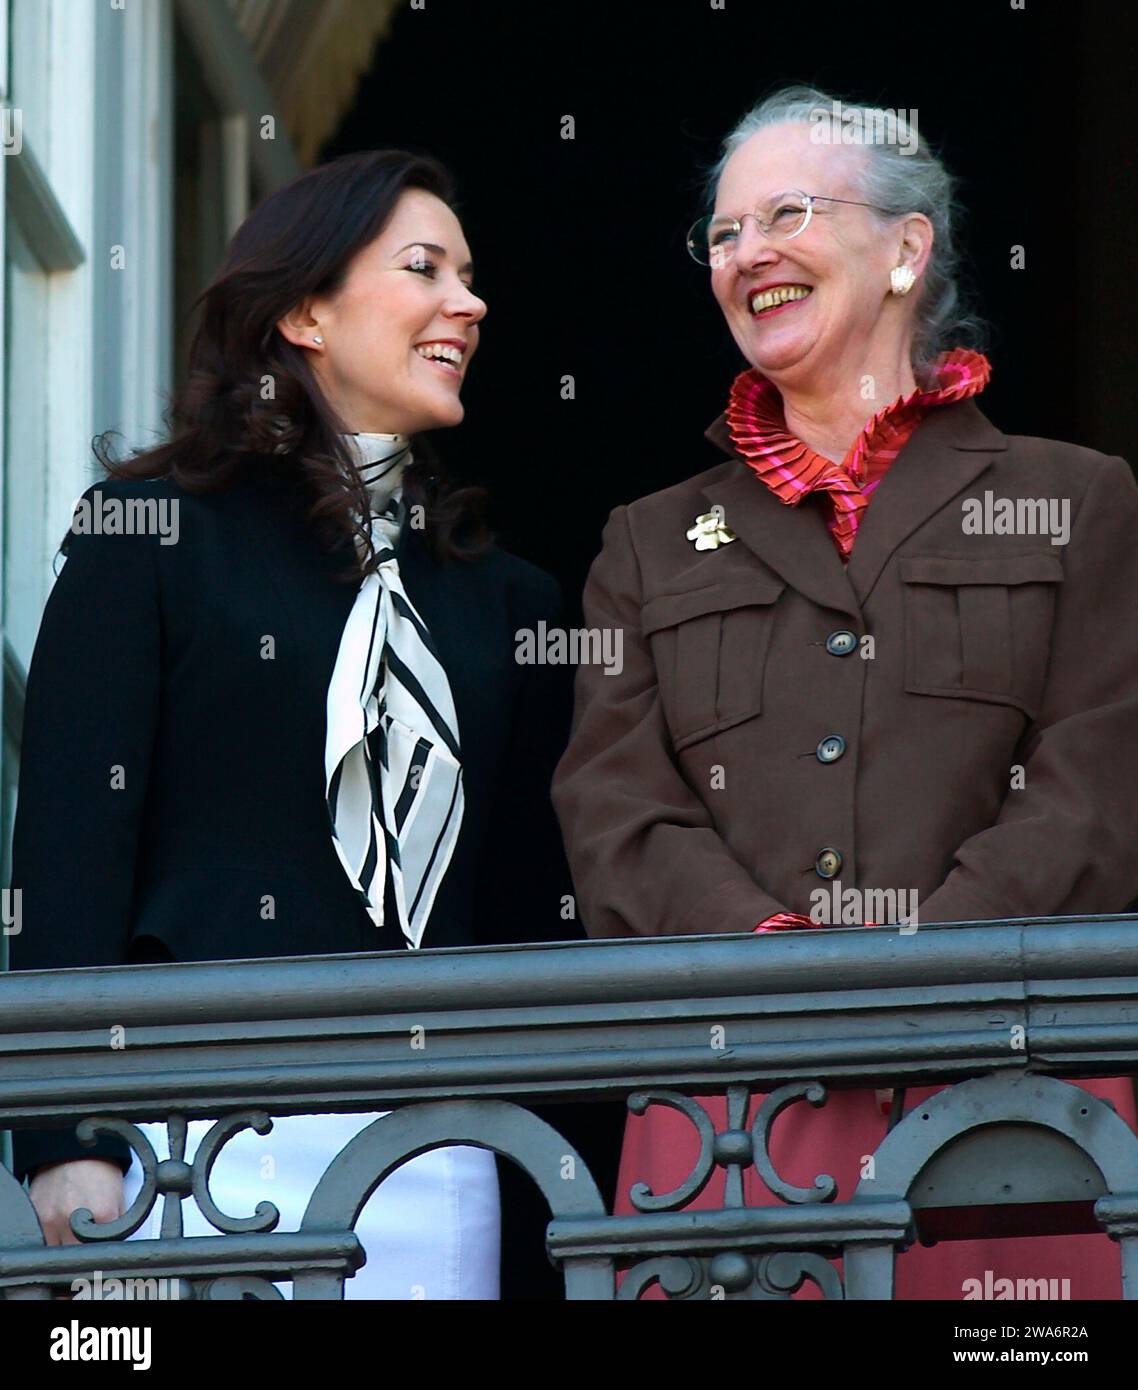 (ARCHIVE) The entire Danish royal family on the balcony at Amalienborg in Copenhagen on Friday 16 April 2004, where Queen Margrethe's 64th birthday was celebrated. Queen Margrethe enjoying herself with her future daughter-in-law Mary Donaldson.Denmarks' Queen Margrethe announced in her New Years speech that she is abdicating on January 14, 2024. Crown Prince Frederik will take her place and become King Frederik the 10th of Denmark, while Australian borne Crown Princess Mary will be Queen of Denmark... (Photo: Keld Navntoft / Scanpix 2024) Stock Photo